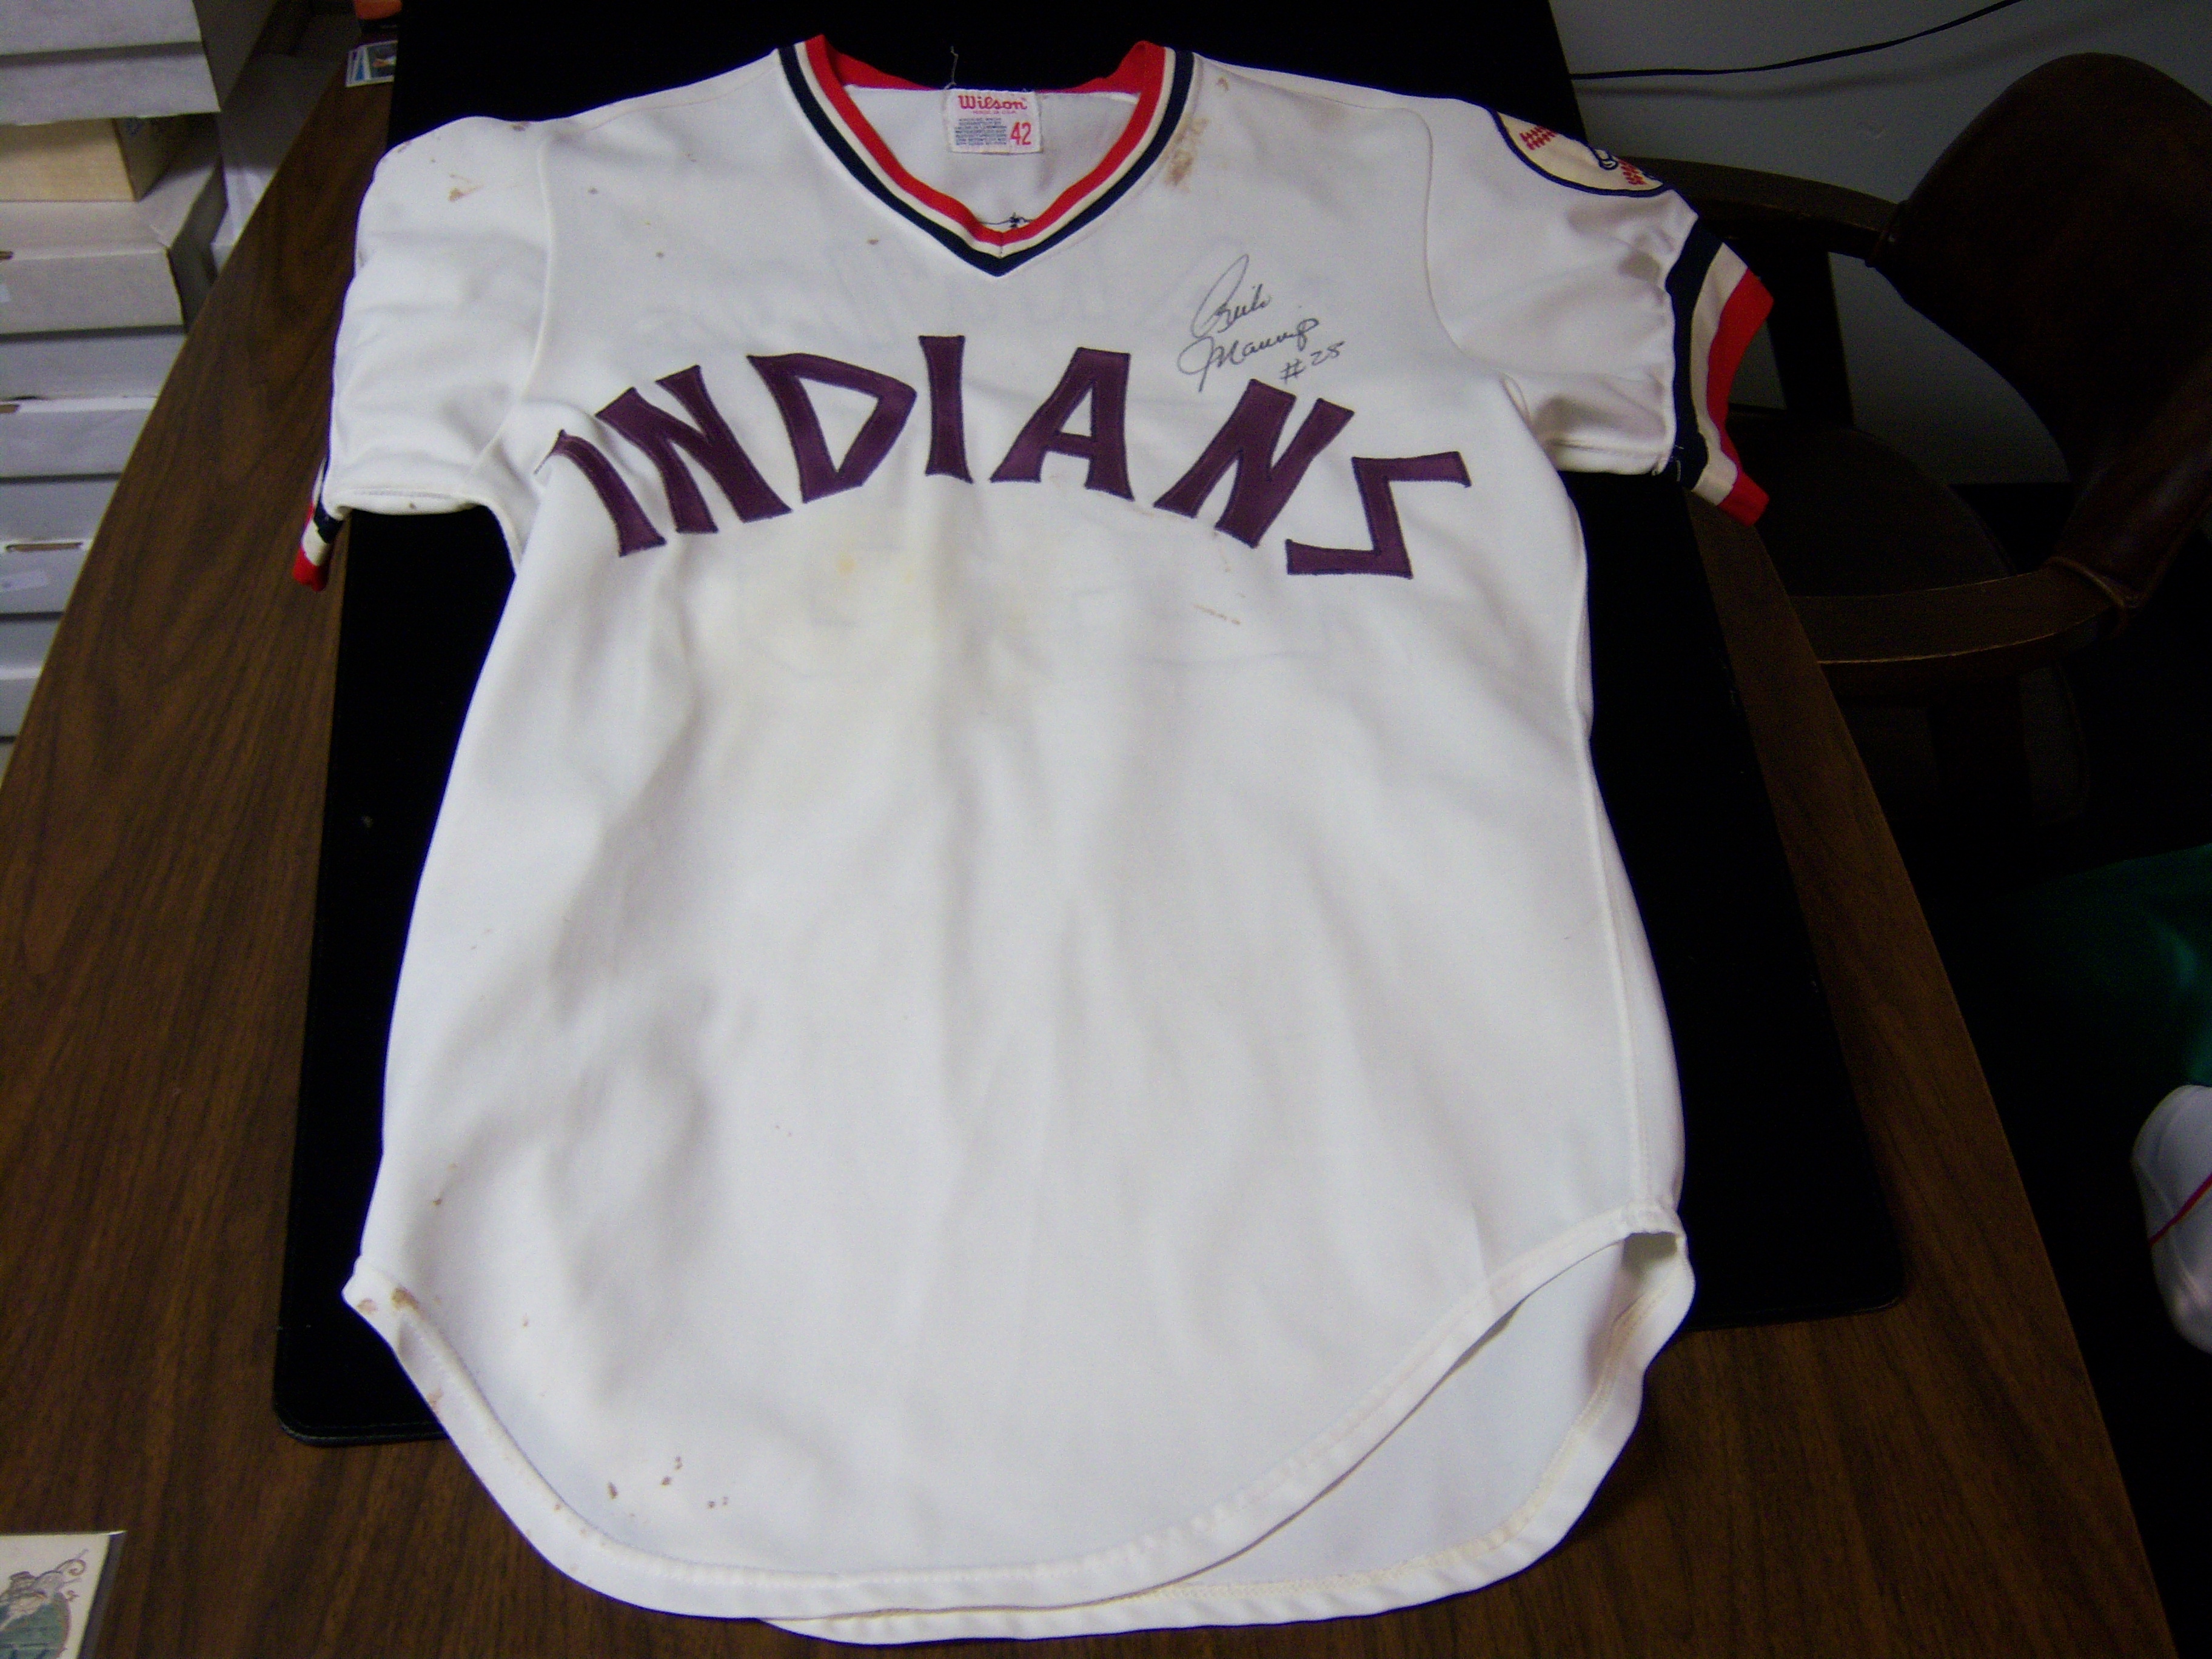 CLEVELAND INDIANS 1999-2001 BATTING PRACTICE STYLE JERSEY